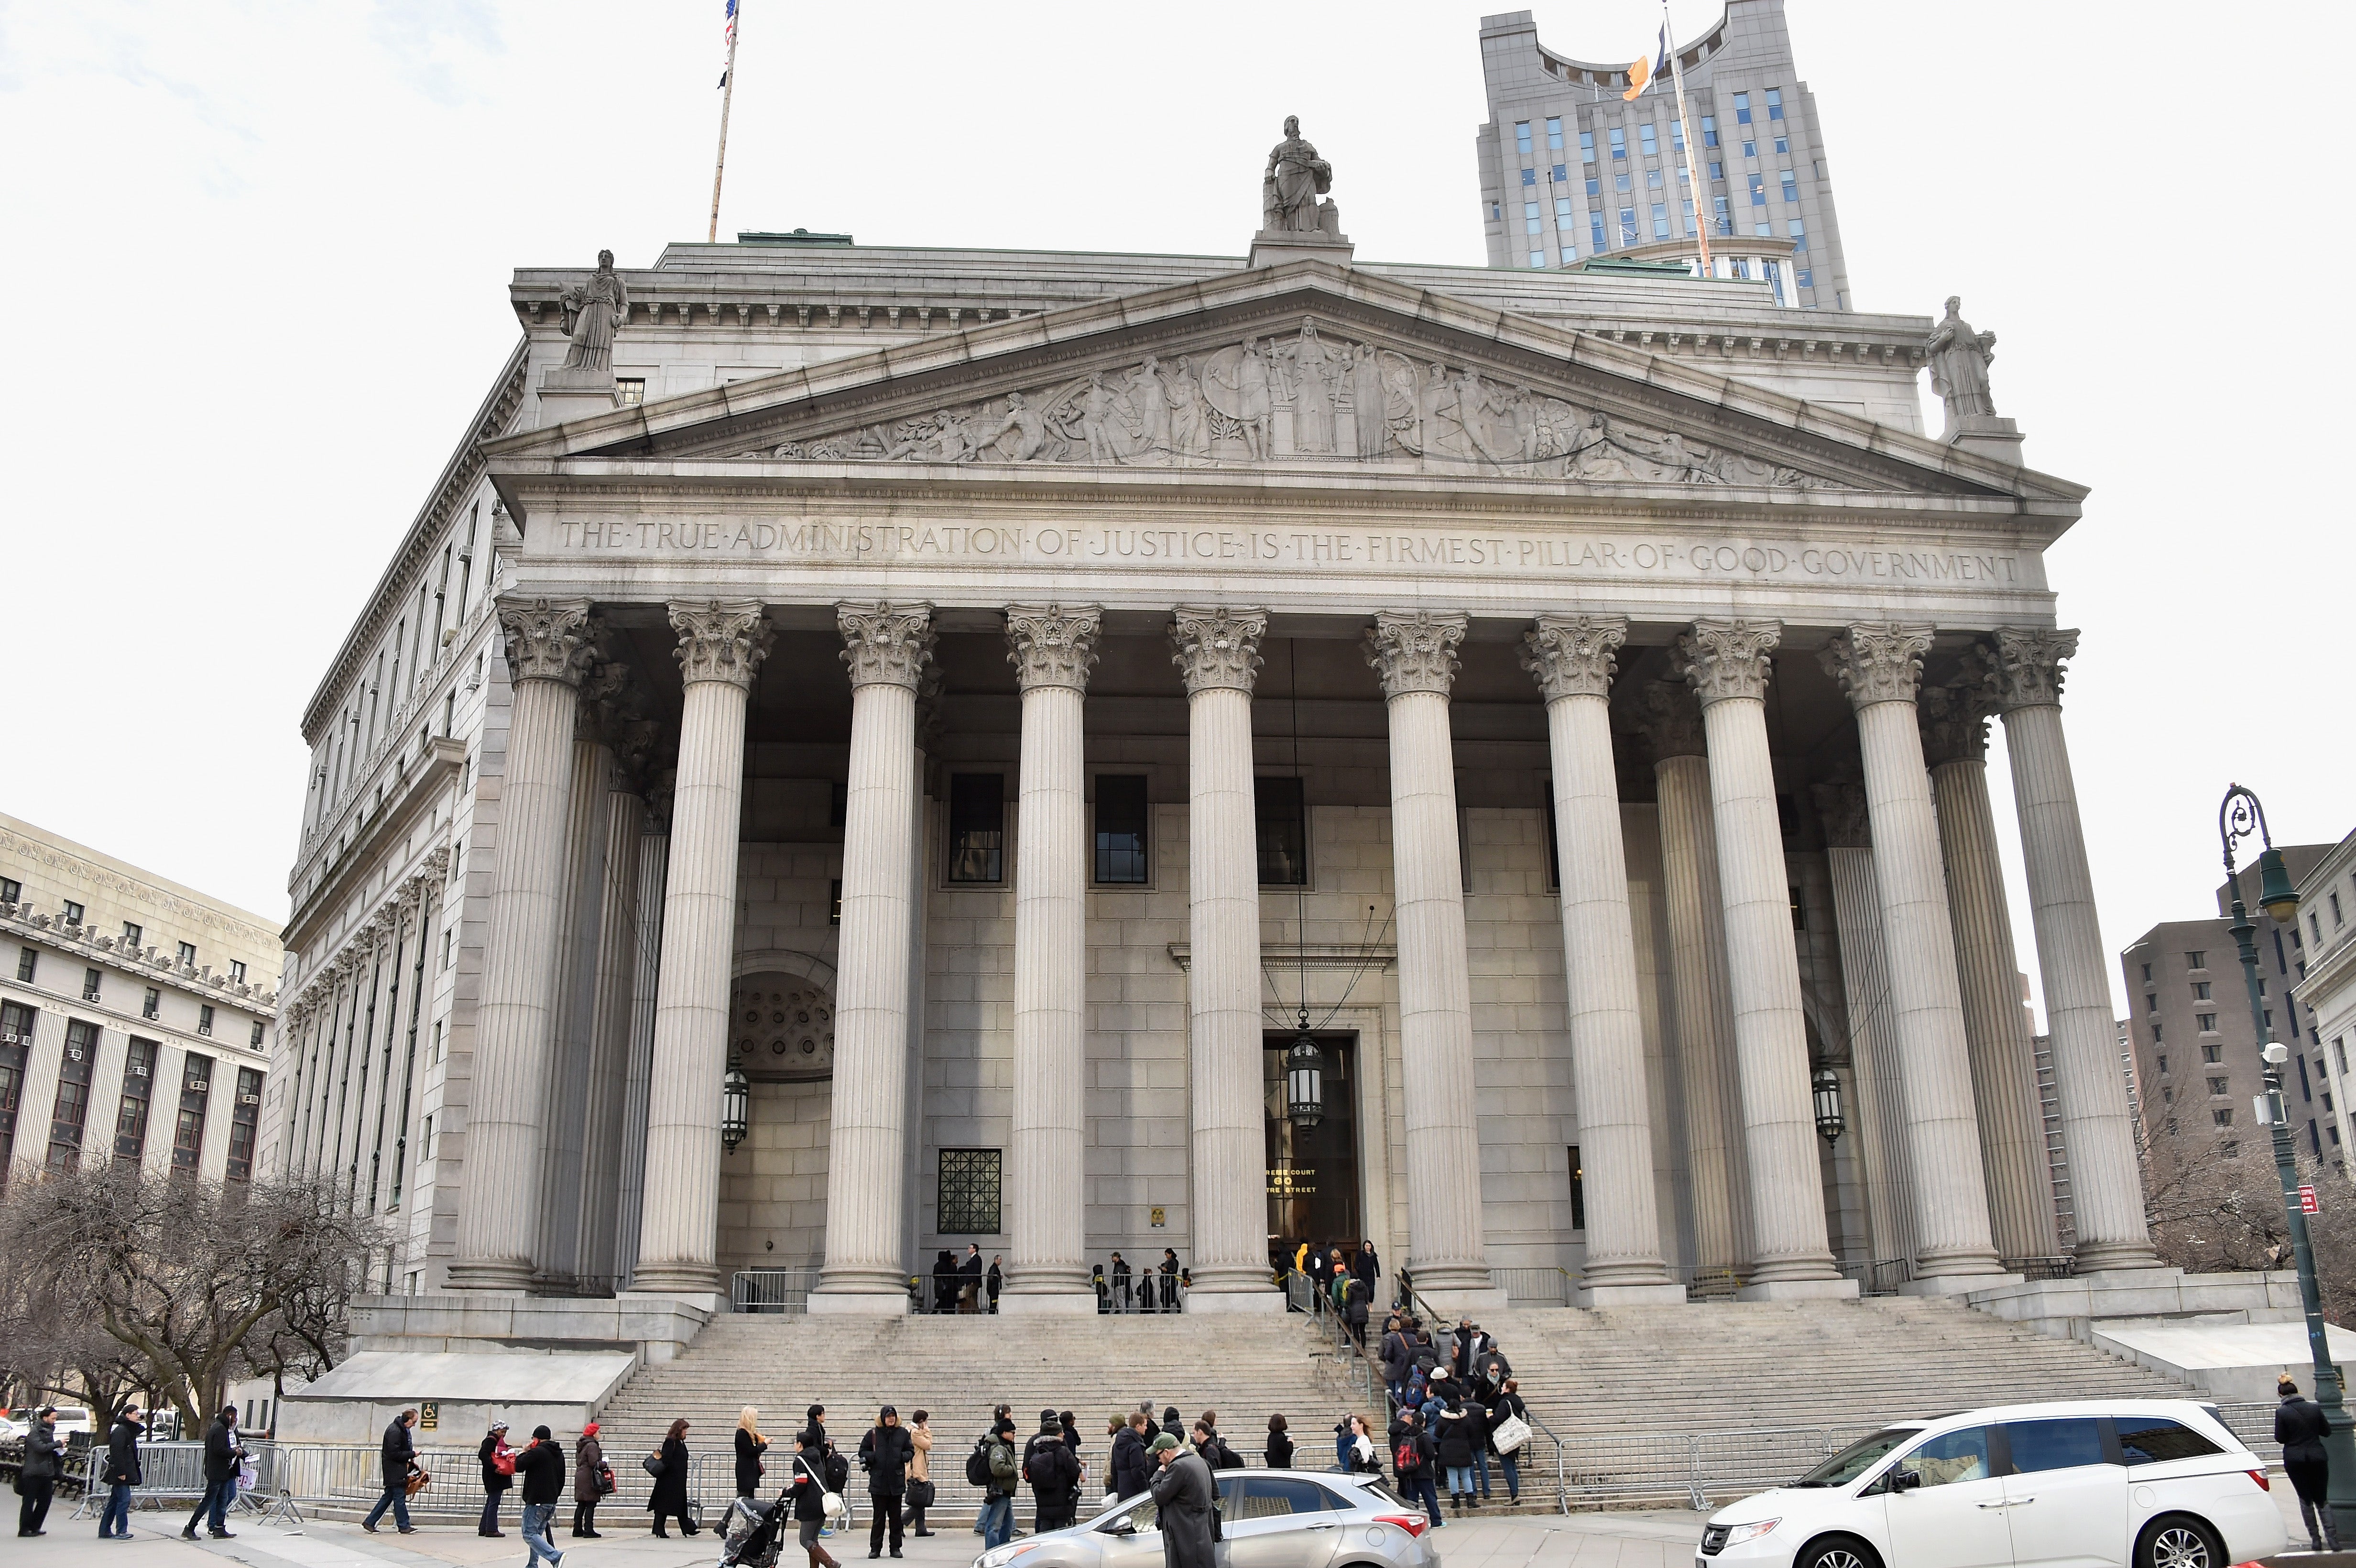 New York Supreme Court reinstates all employees fired for being unvaccinated, orders backpay